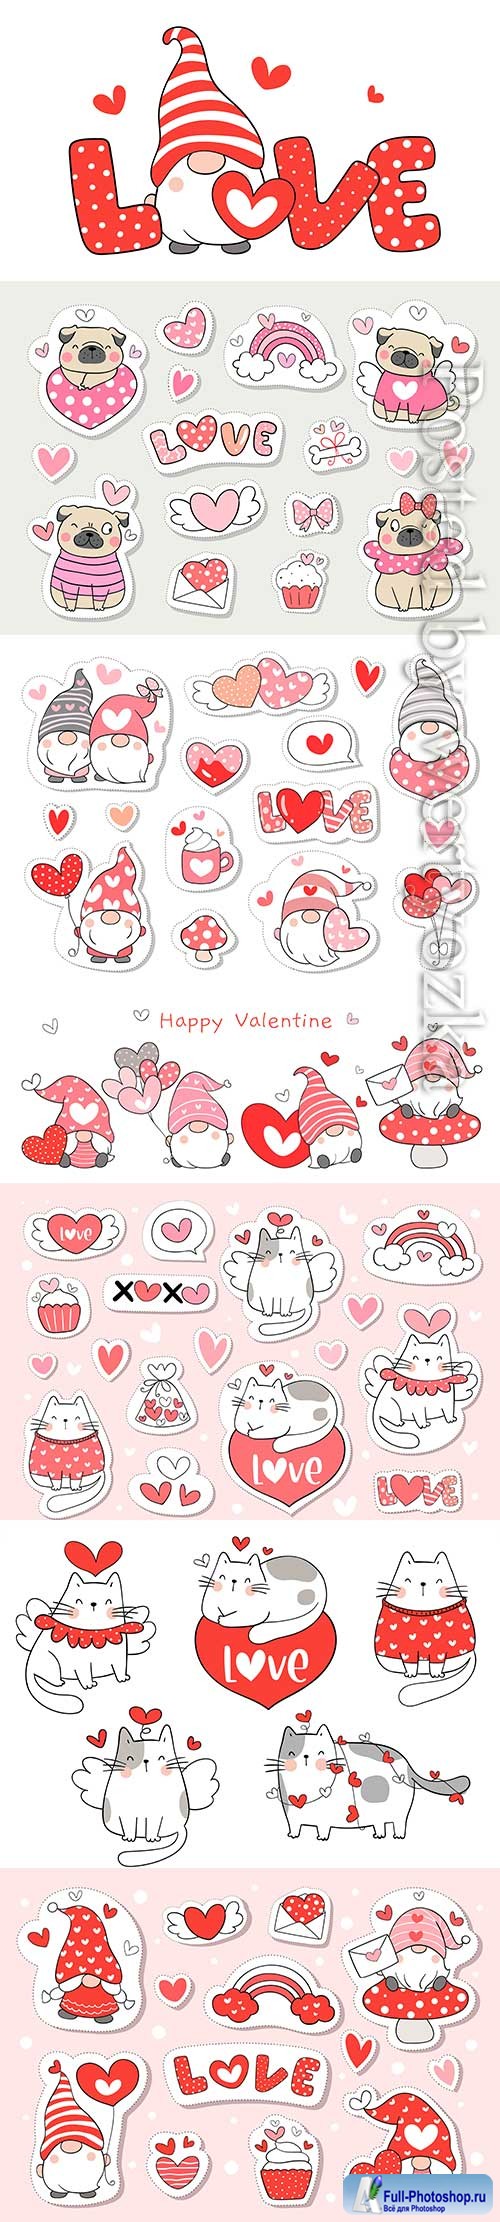 Draw collection stickers sweet for valentine